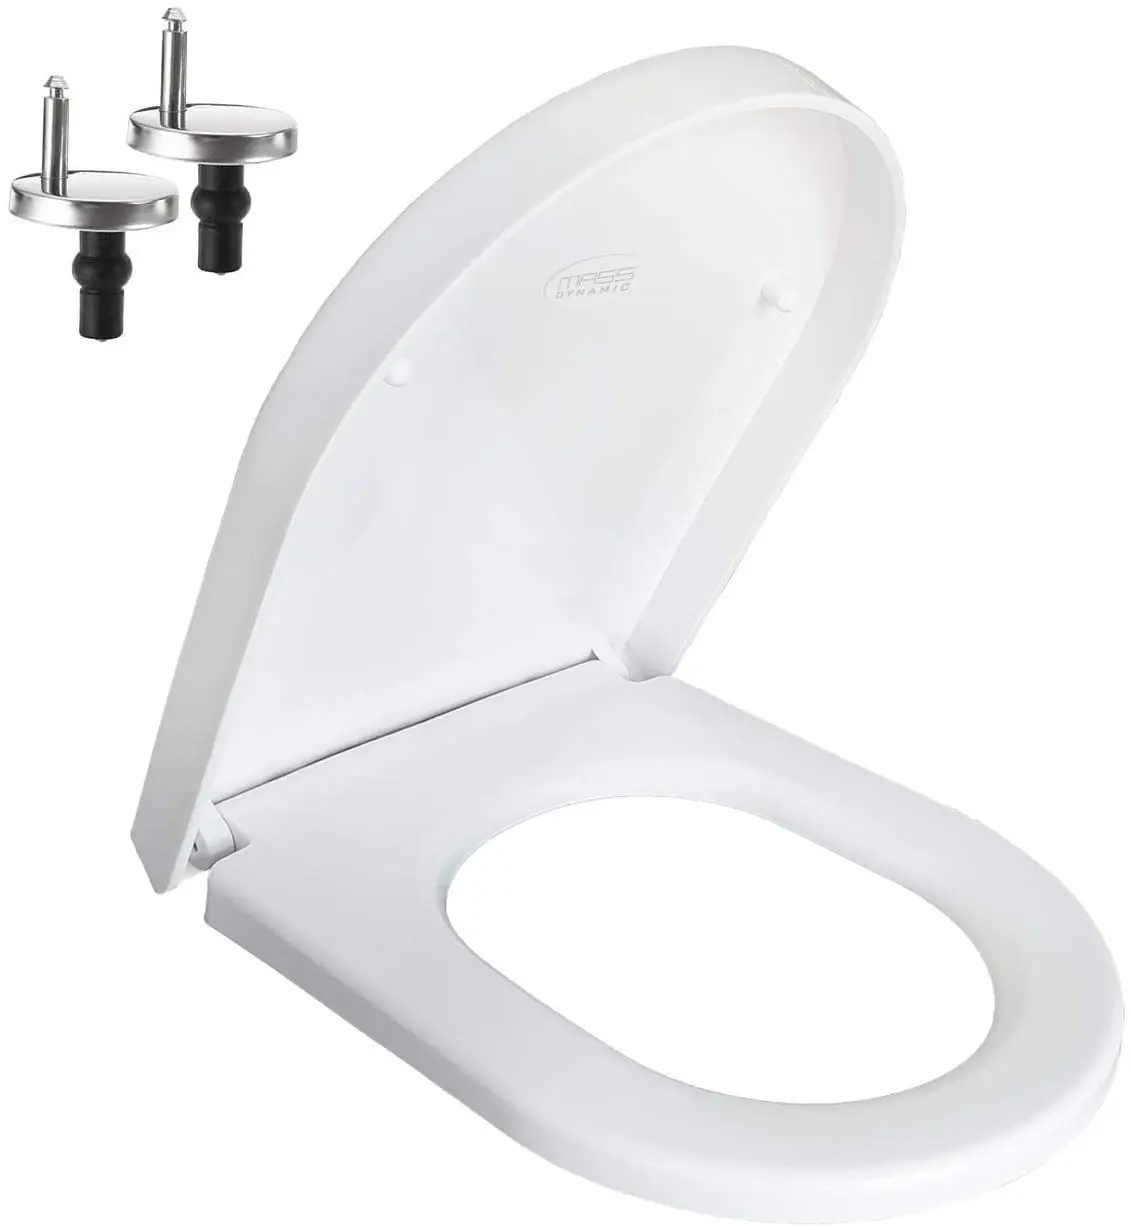 LUXURY WHITE D SHAPE TOILET SEAT SOFT CLOSE WITH TOP FIXING HINGES HEAVY DUTY 